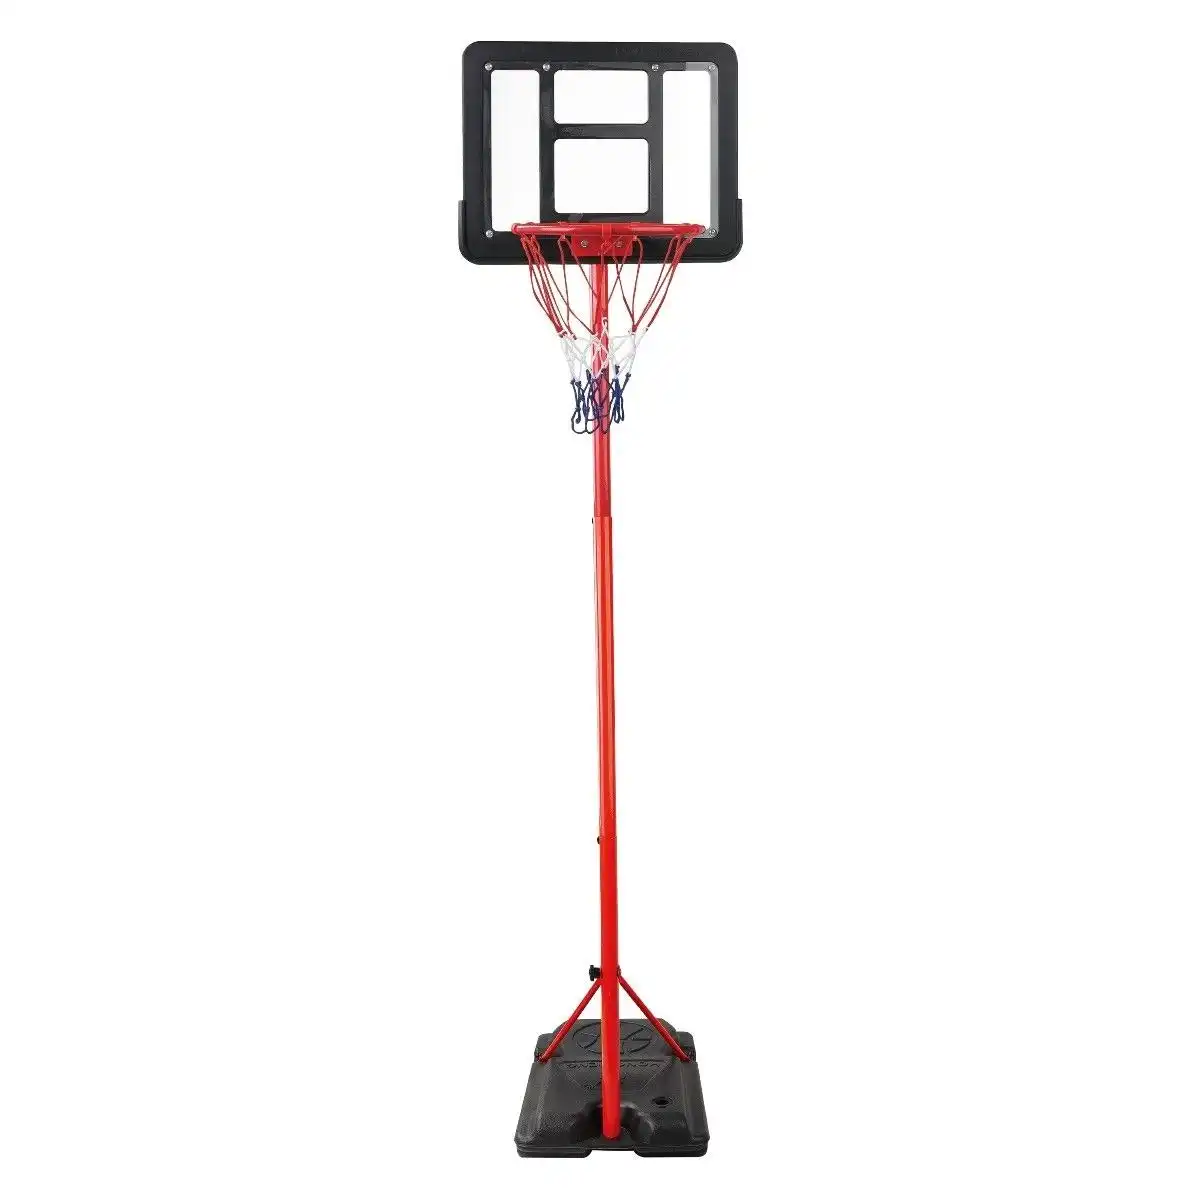 Ausway 1.6m 2m Kids Portable Basketball Hoop Stand System with Adjustable Height Net Ring Ball